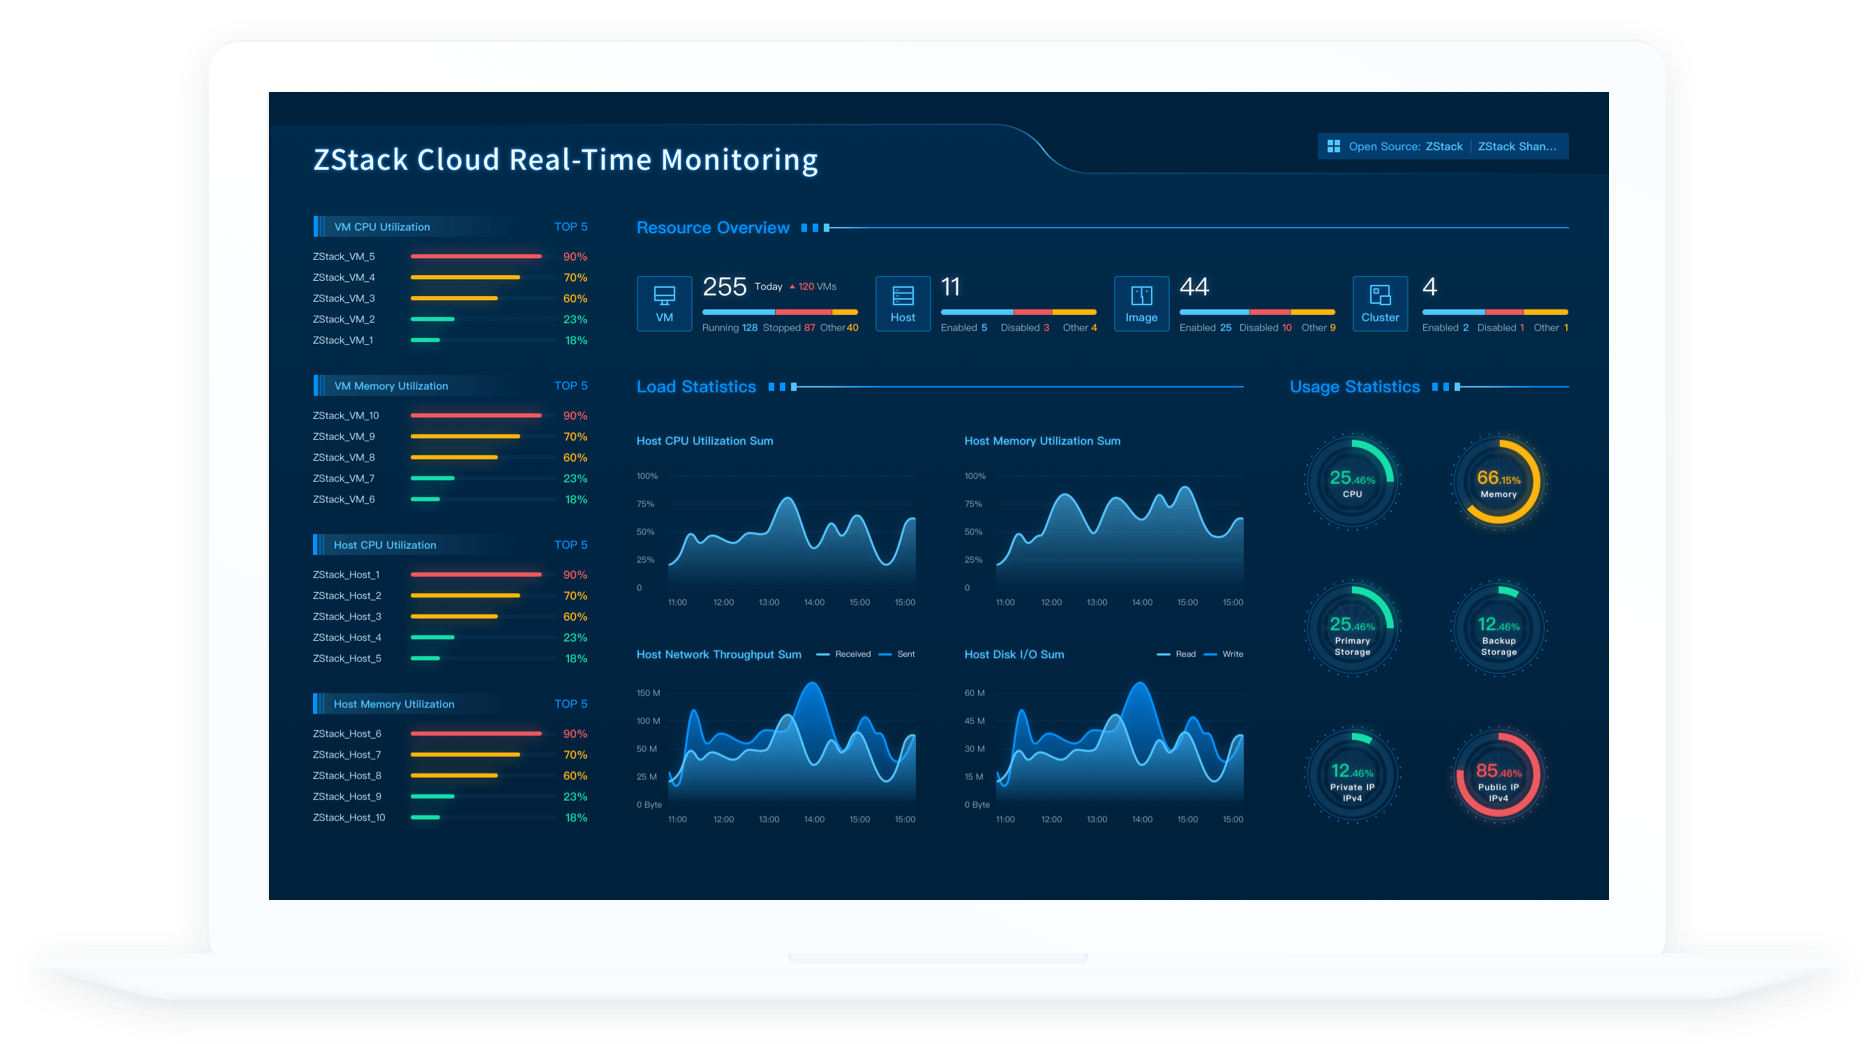 Zstack Cloud Real-time Monitoring